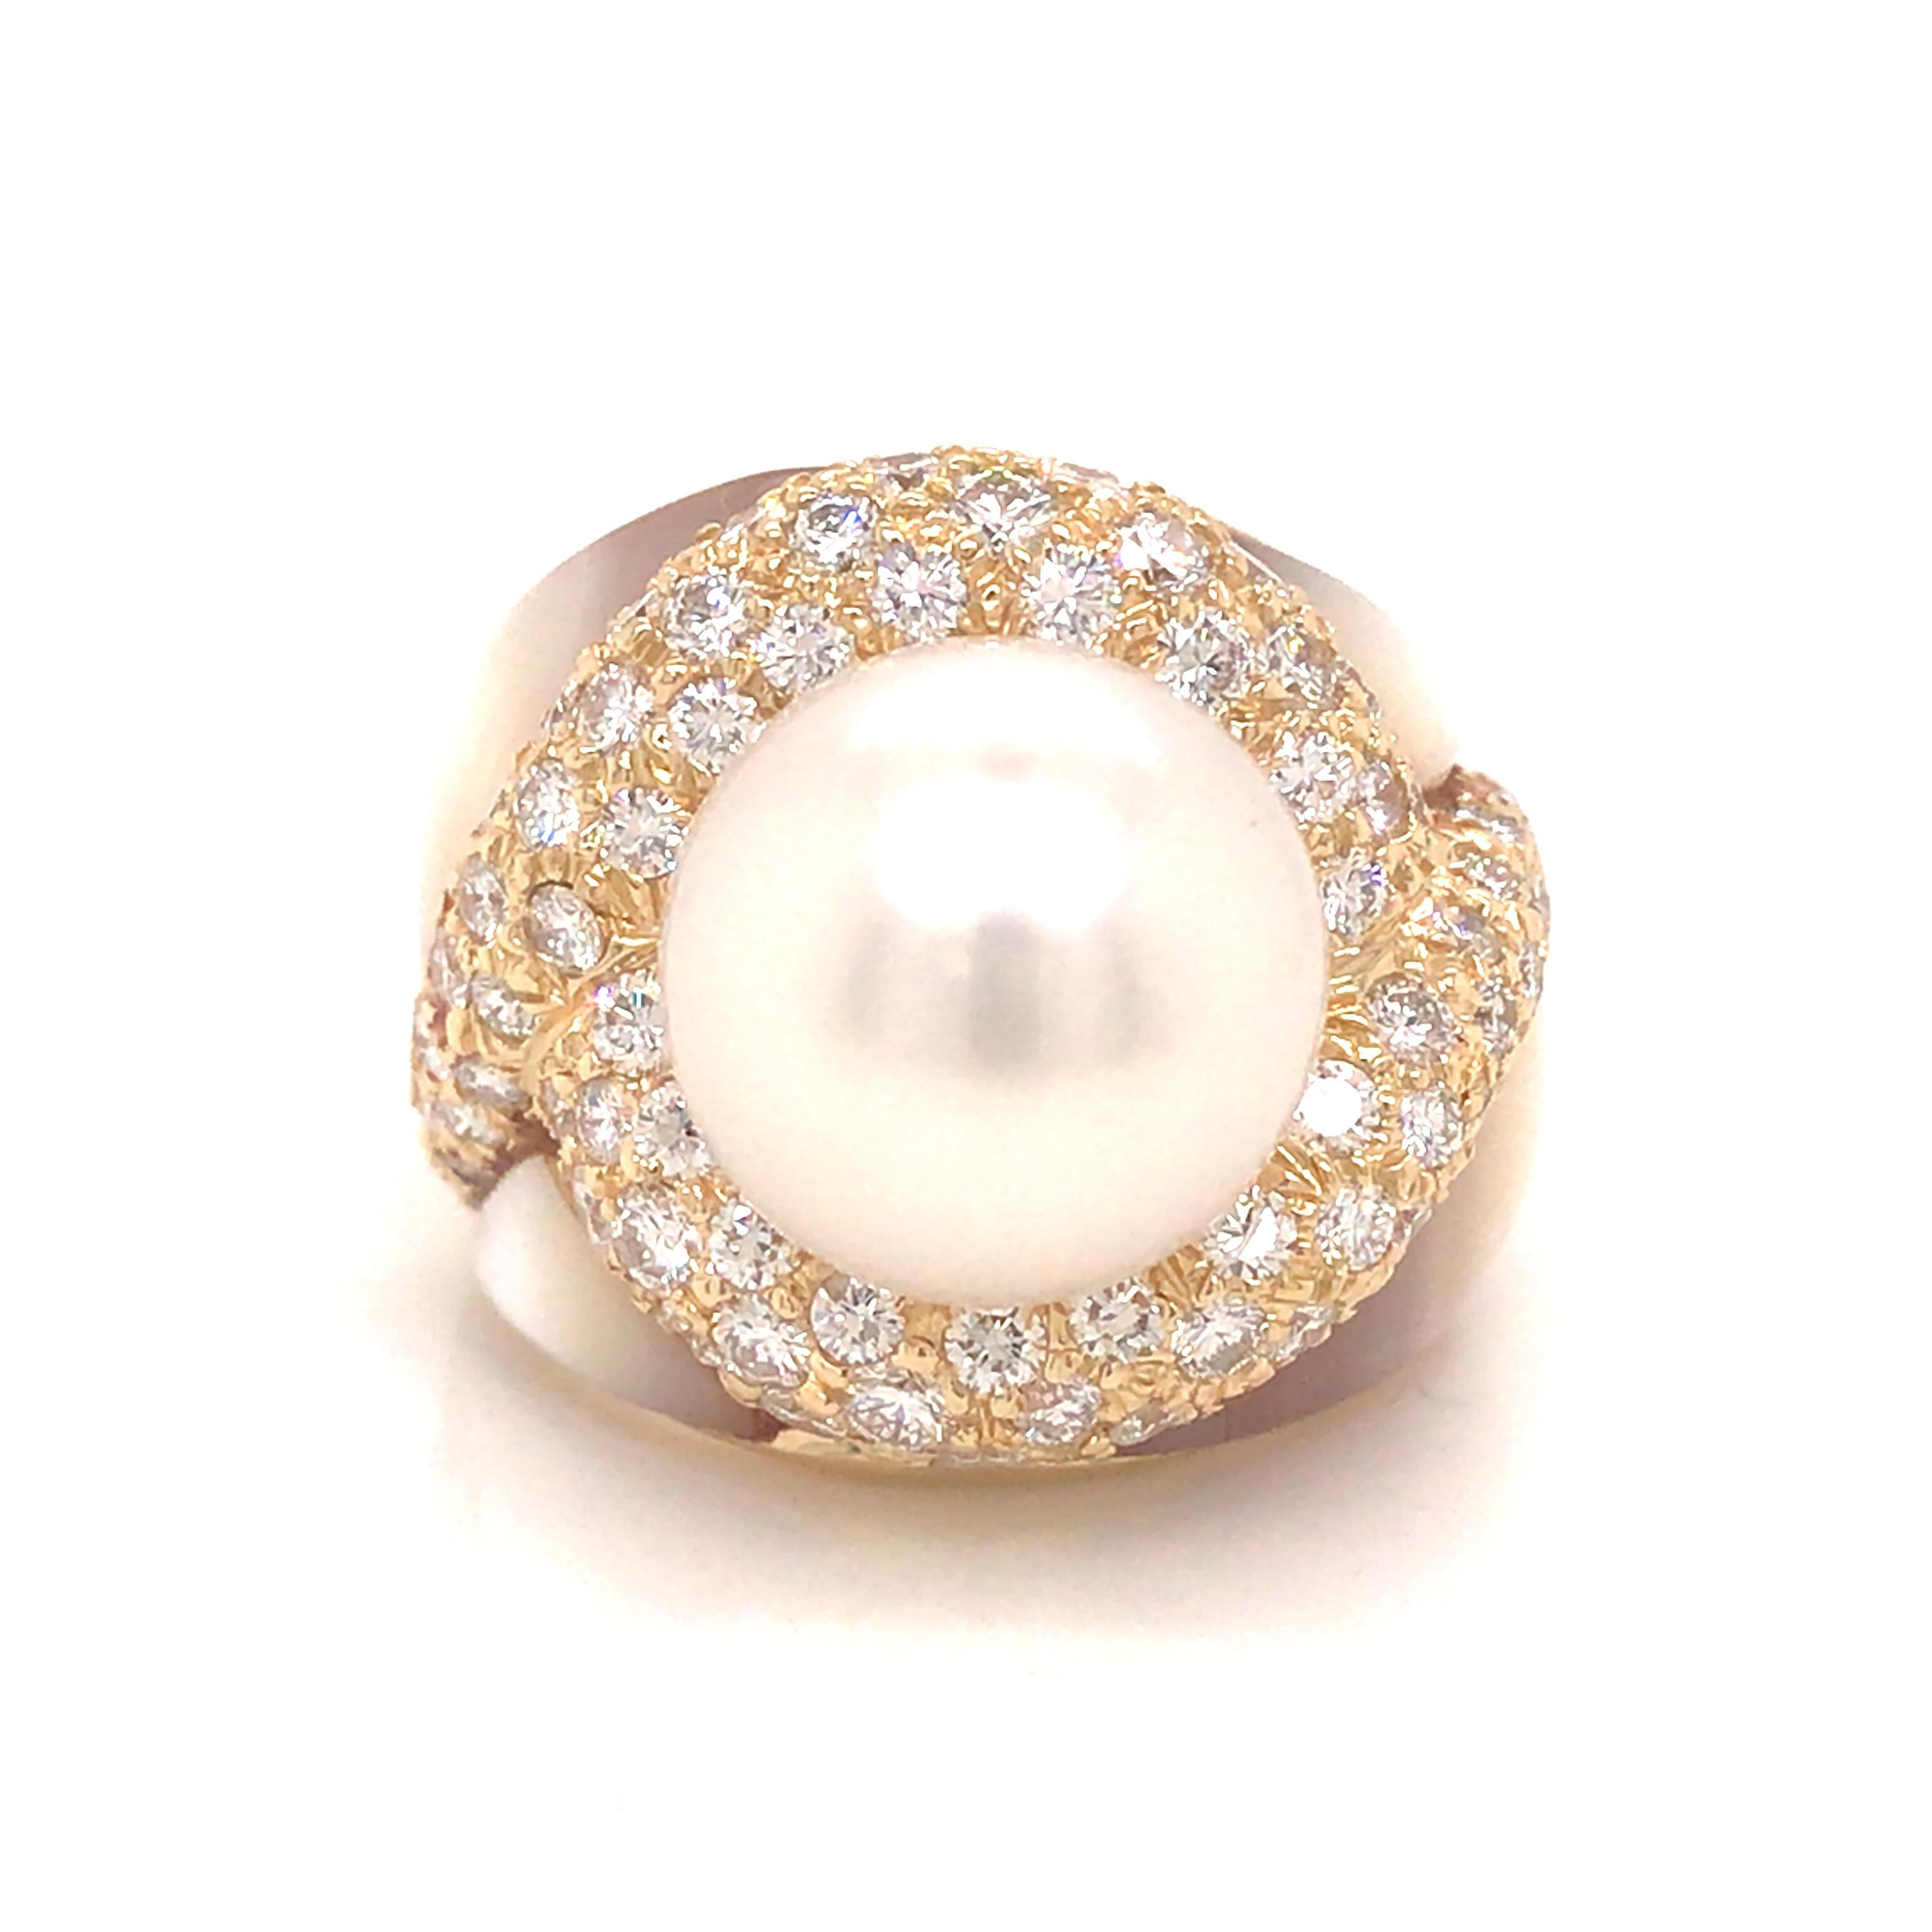 Pearl Diamond Ring in 18K Yellow Gold.  Round white mm Pearl expertly set surrounded by  Mother of Pearl and Round Brilliant Cut Diamonds weighing 3.55 carat total weight, G-H in color and VS in clarity.  Ring size 6.  The Ring measures 3/4 inch in